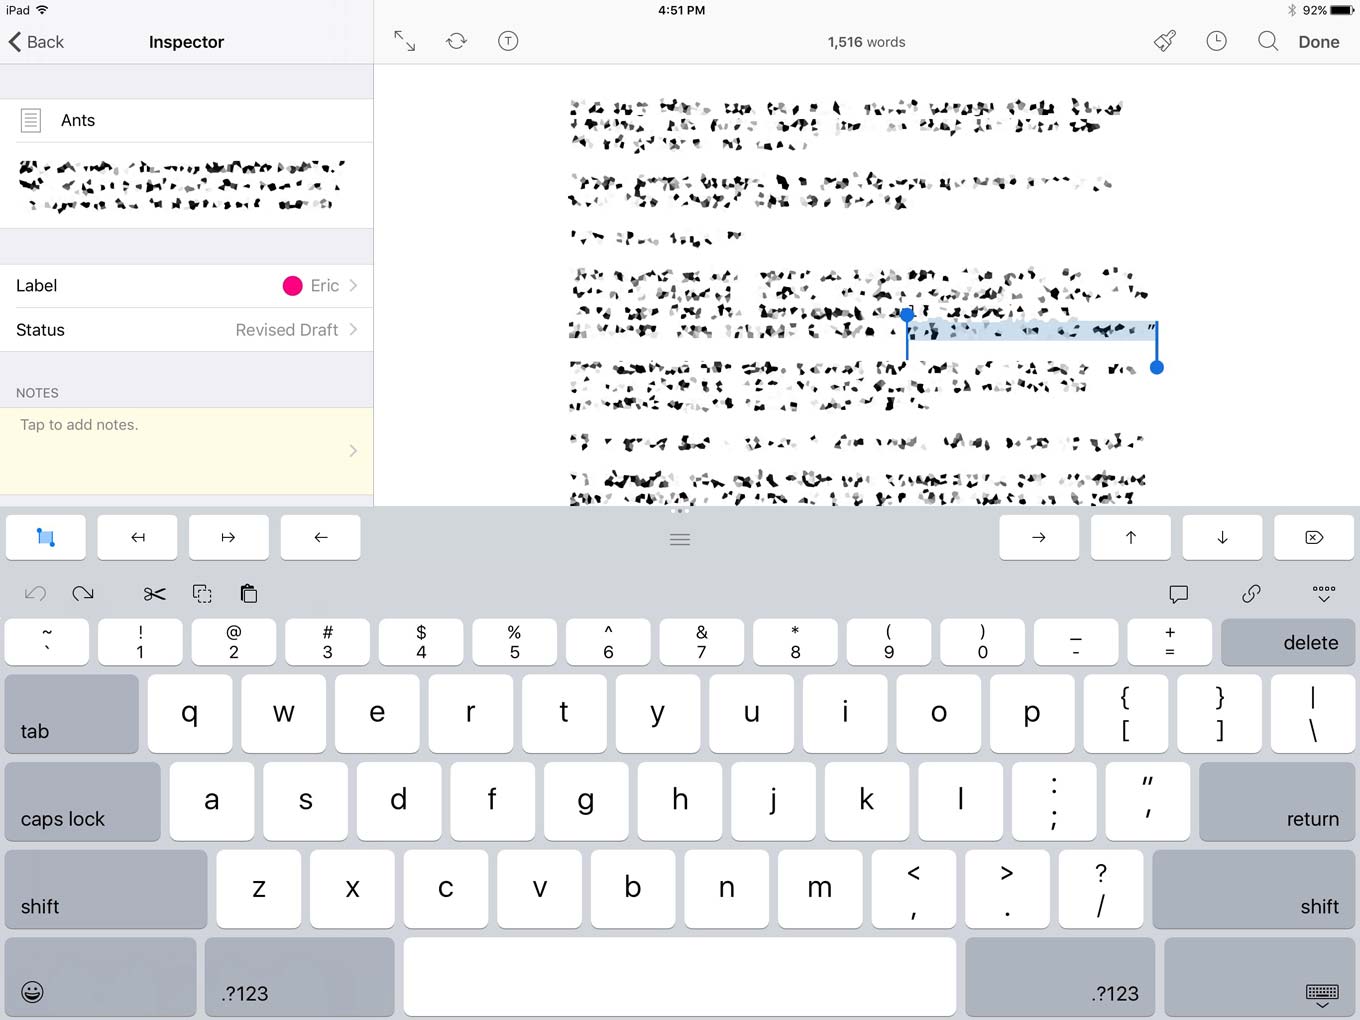 Extra keyboard row - Scrivener iOS: Keyboard Quick Access Buttons